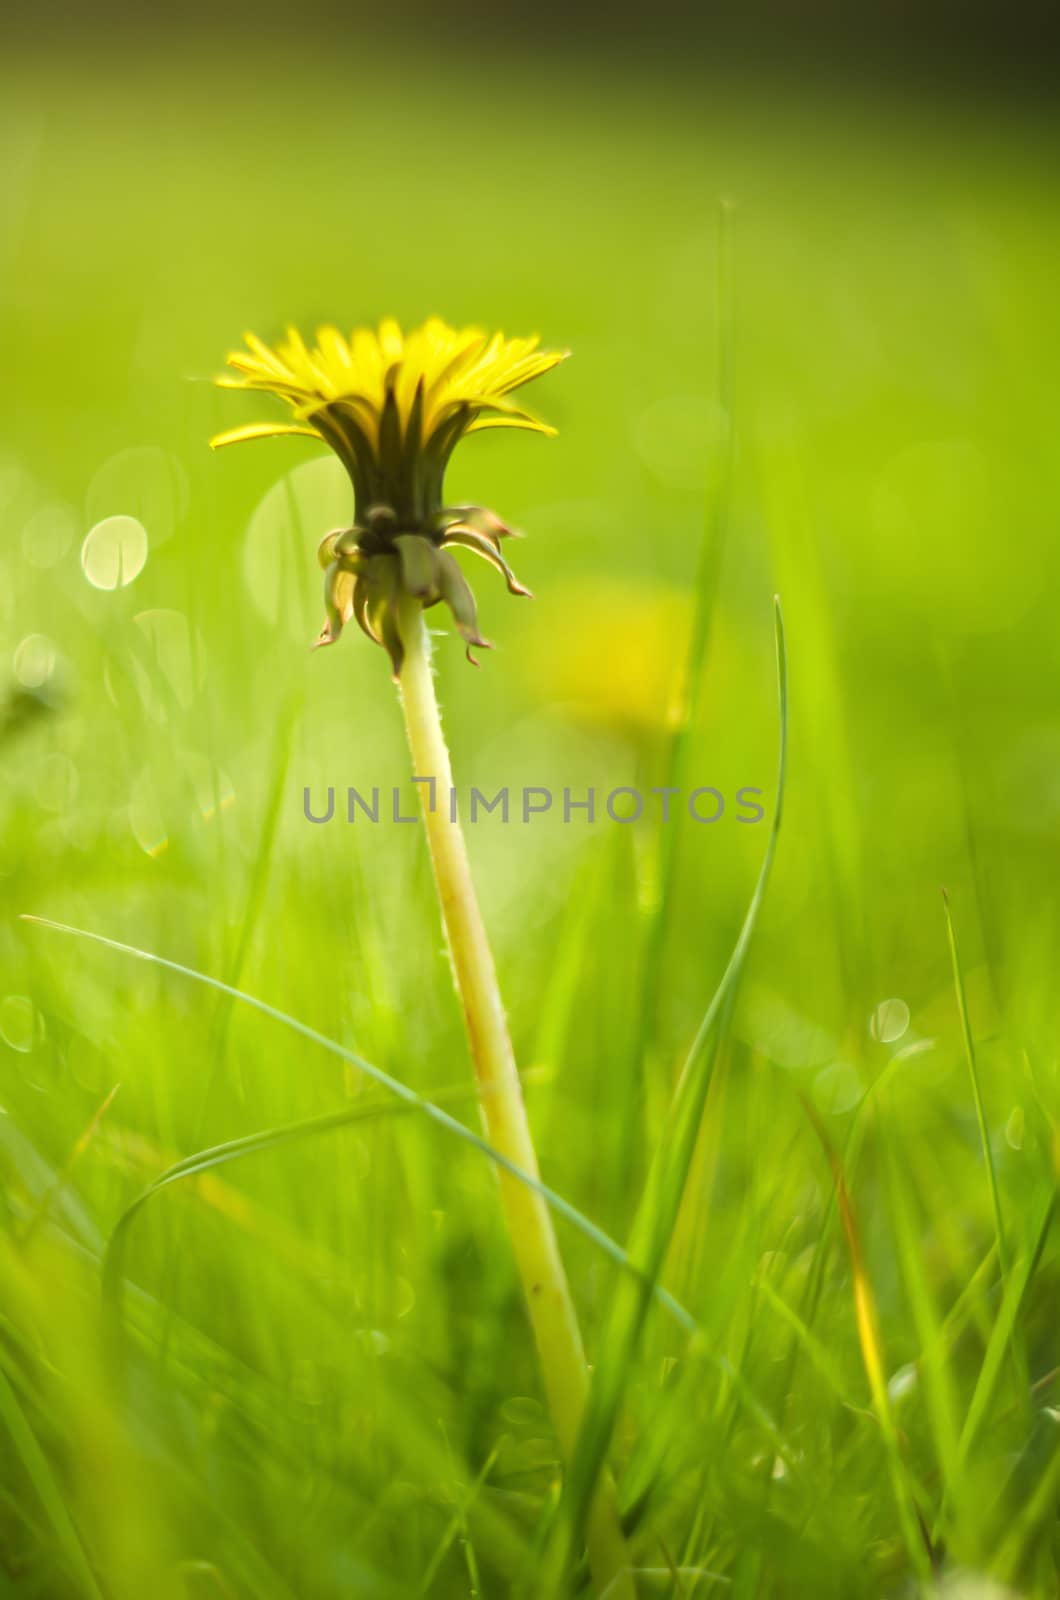 Detail of closed yellow dandelion bloom isolated on blur green background.